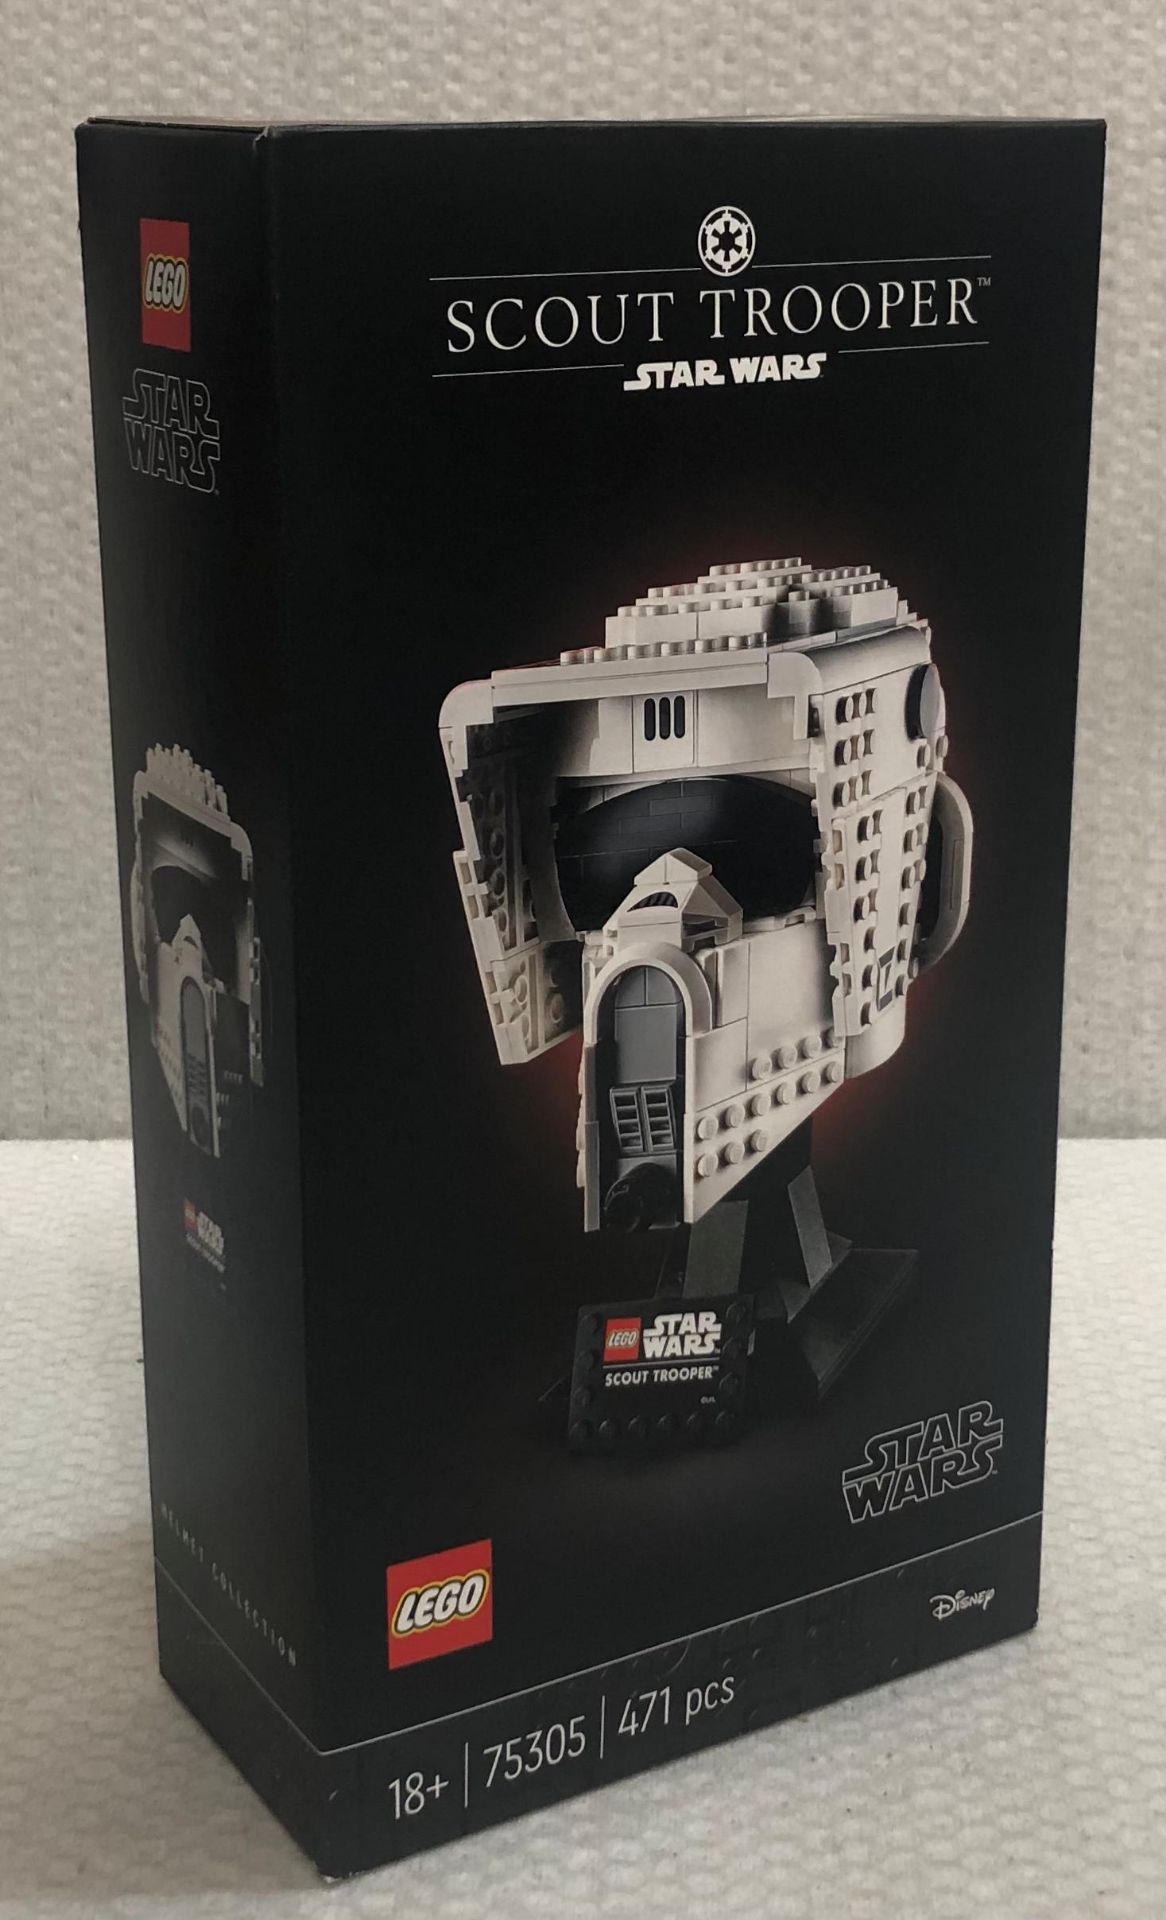 1 x Lego Star Wars Scout Trooper Helmet - Model 75305 - New/Boxed - Image 2 of 6